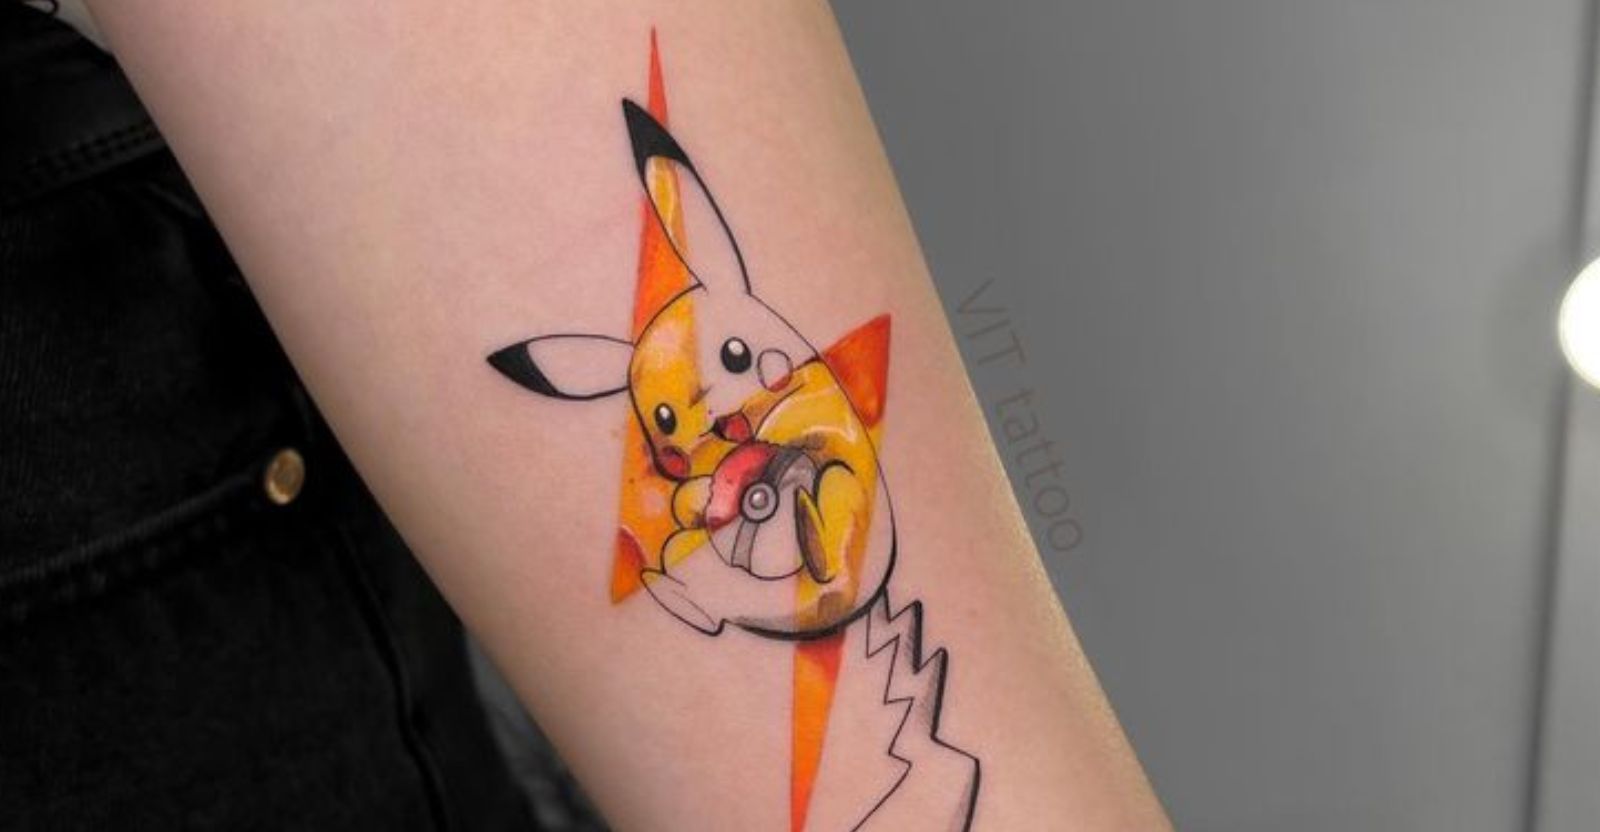 Flow Tattoo - Doodle Mimikyu! Zoey's favorite pokemon from the Sun and  Moon. ▪️Done by: @zoeylinink ▪️Email: inquiry@flowtattoo.com #tattoo # tattoos #ink #inked #art #tattooartist #tattooart #tattooed #tattoolife  #love #tattooideas #artist ...